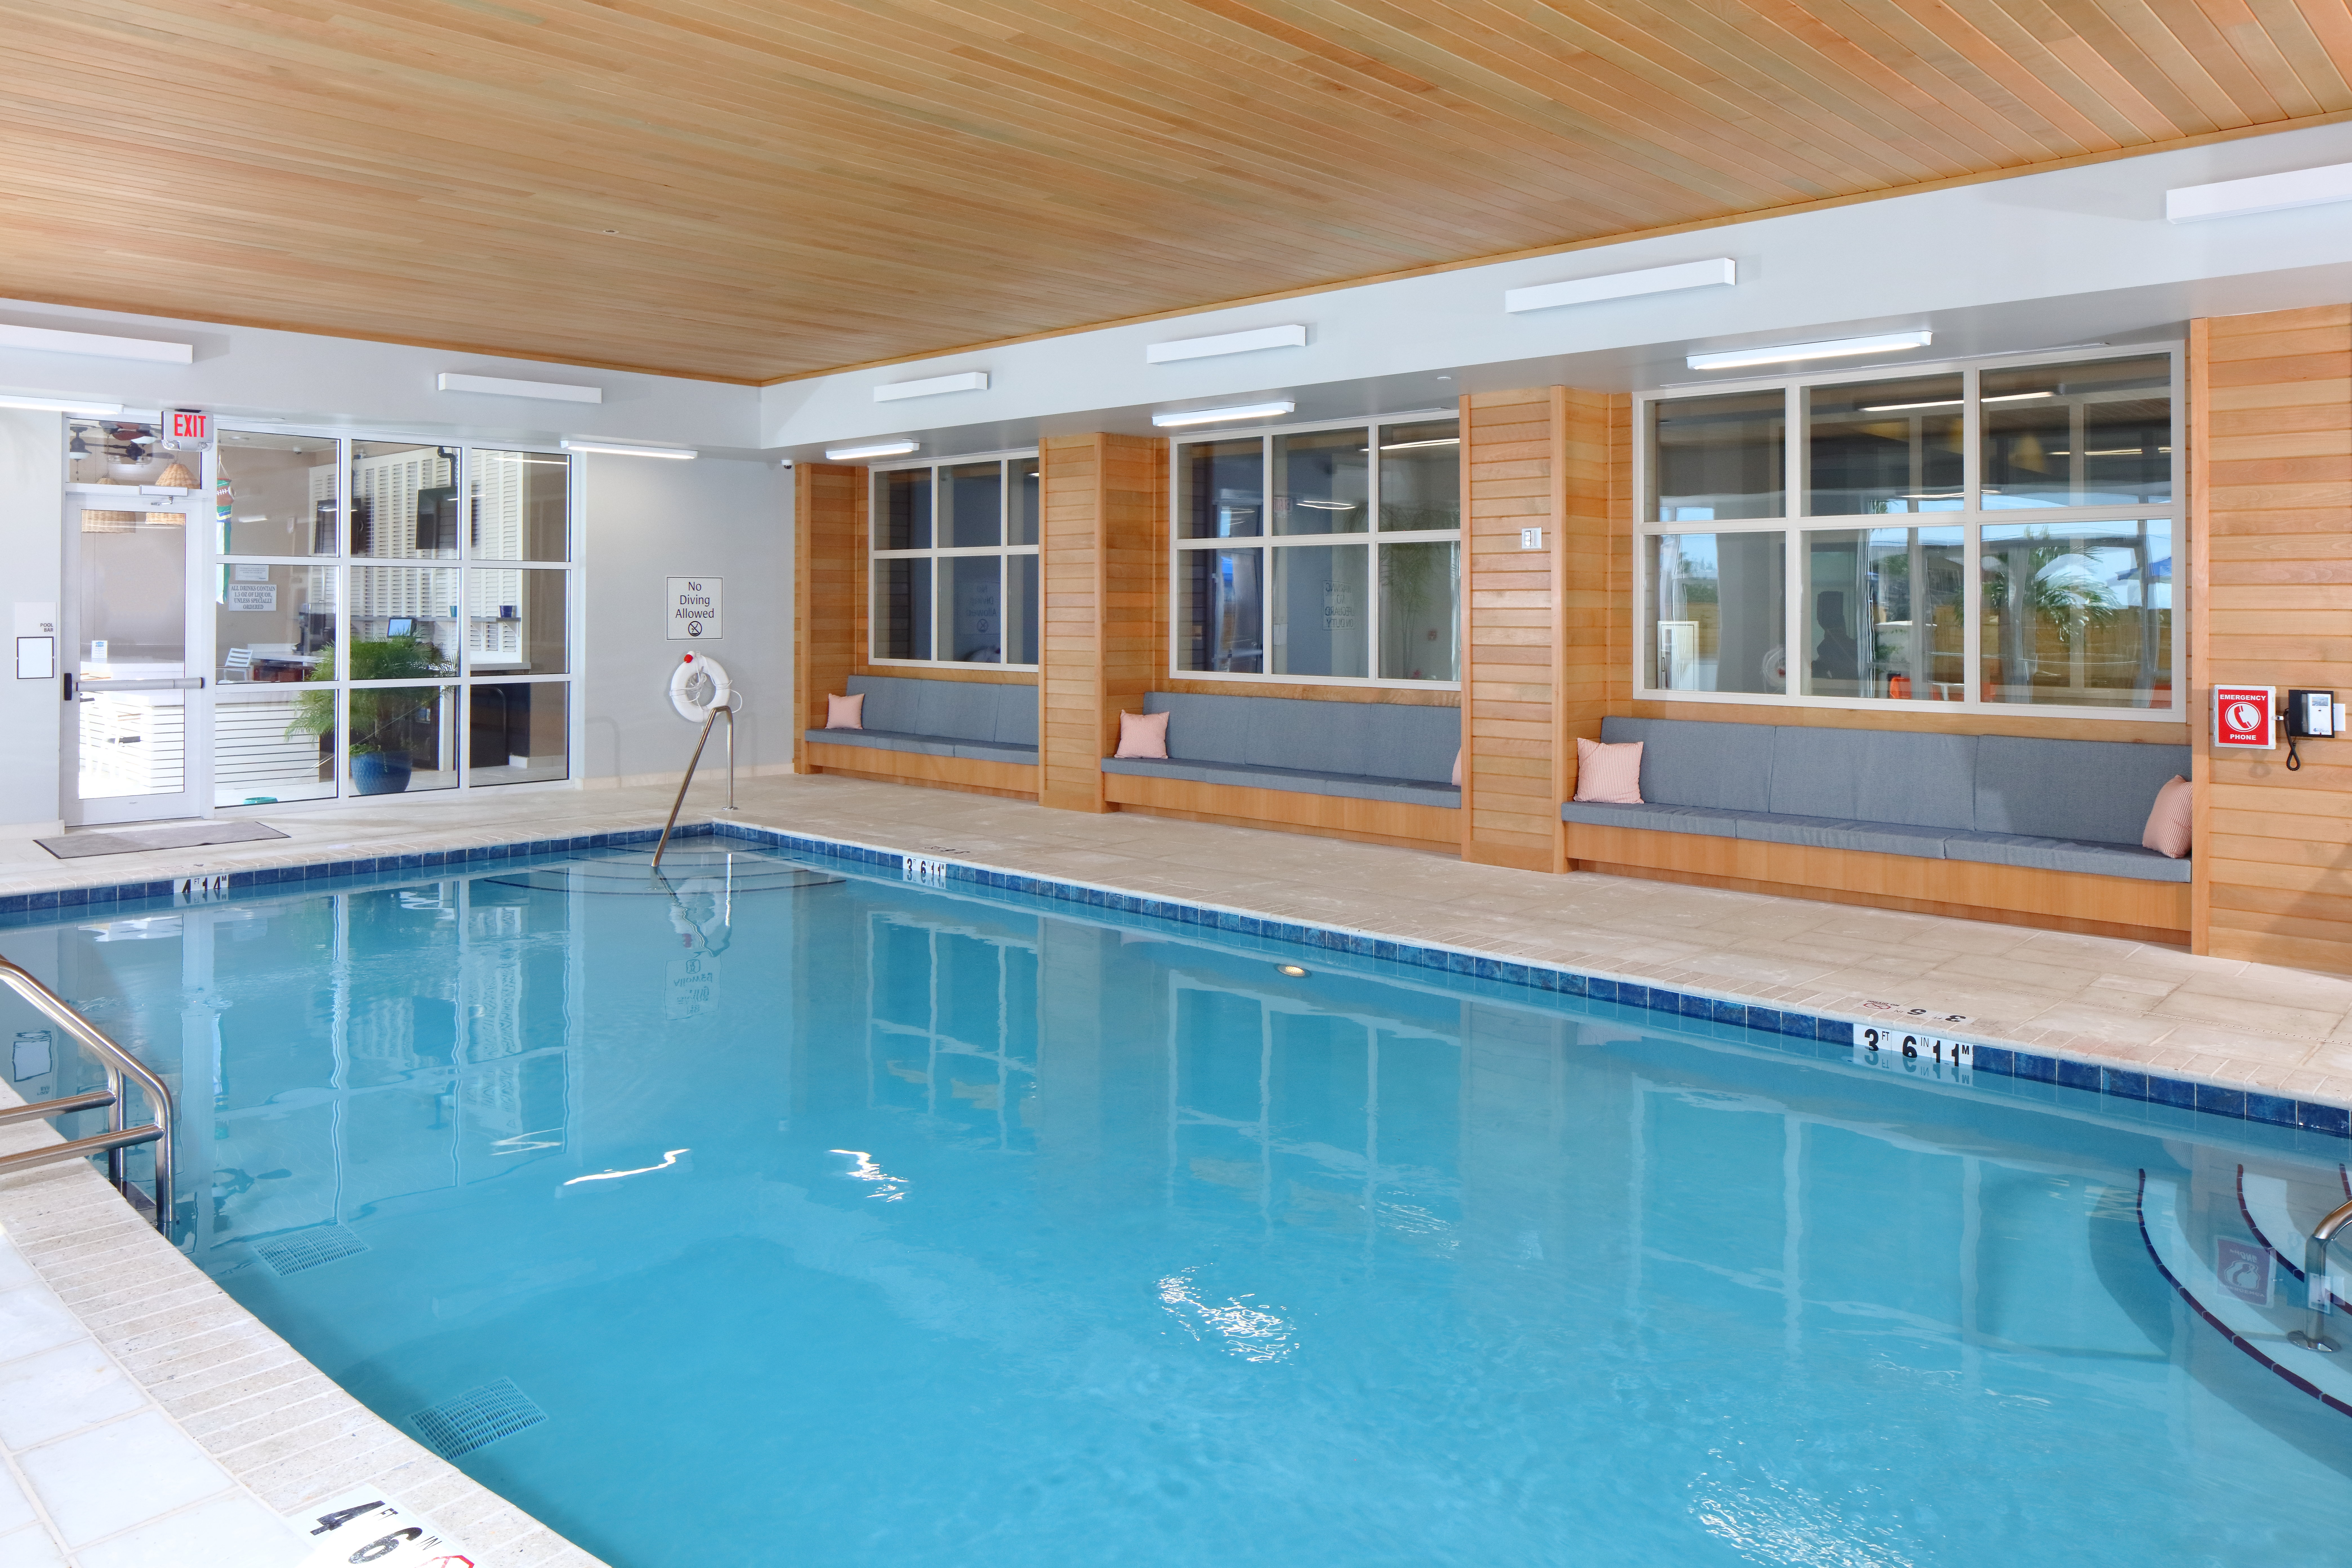 Year round fun with our heated indoor pool